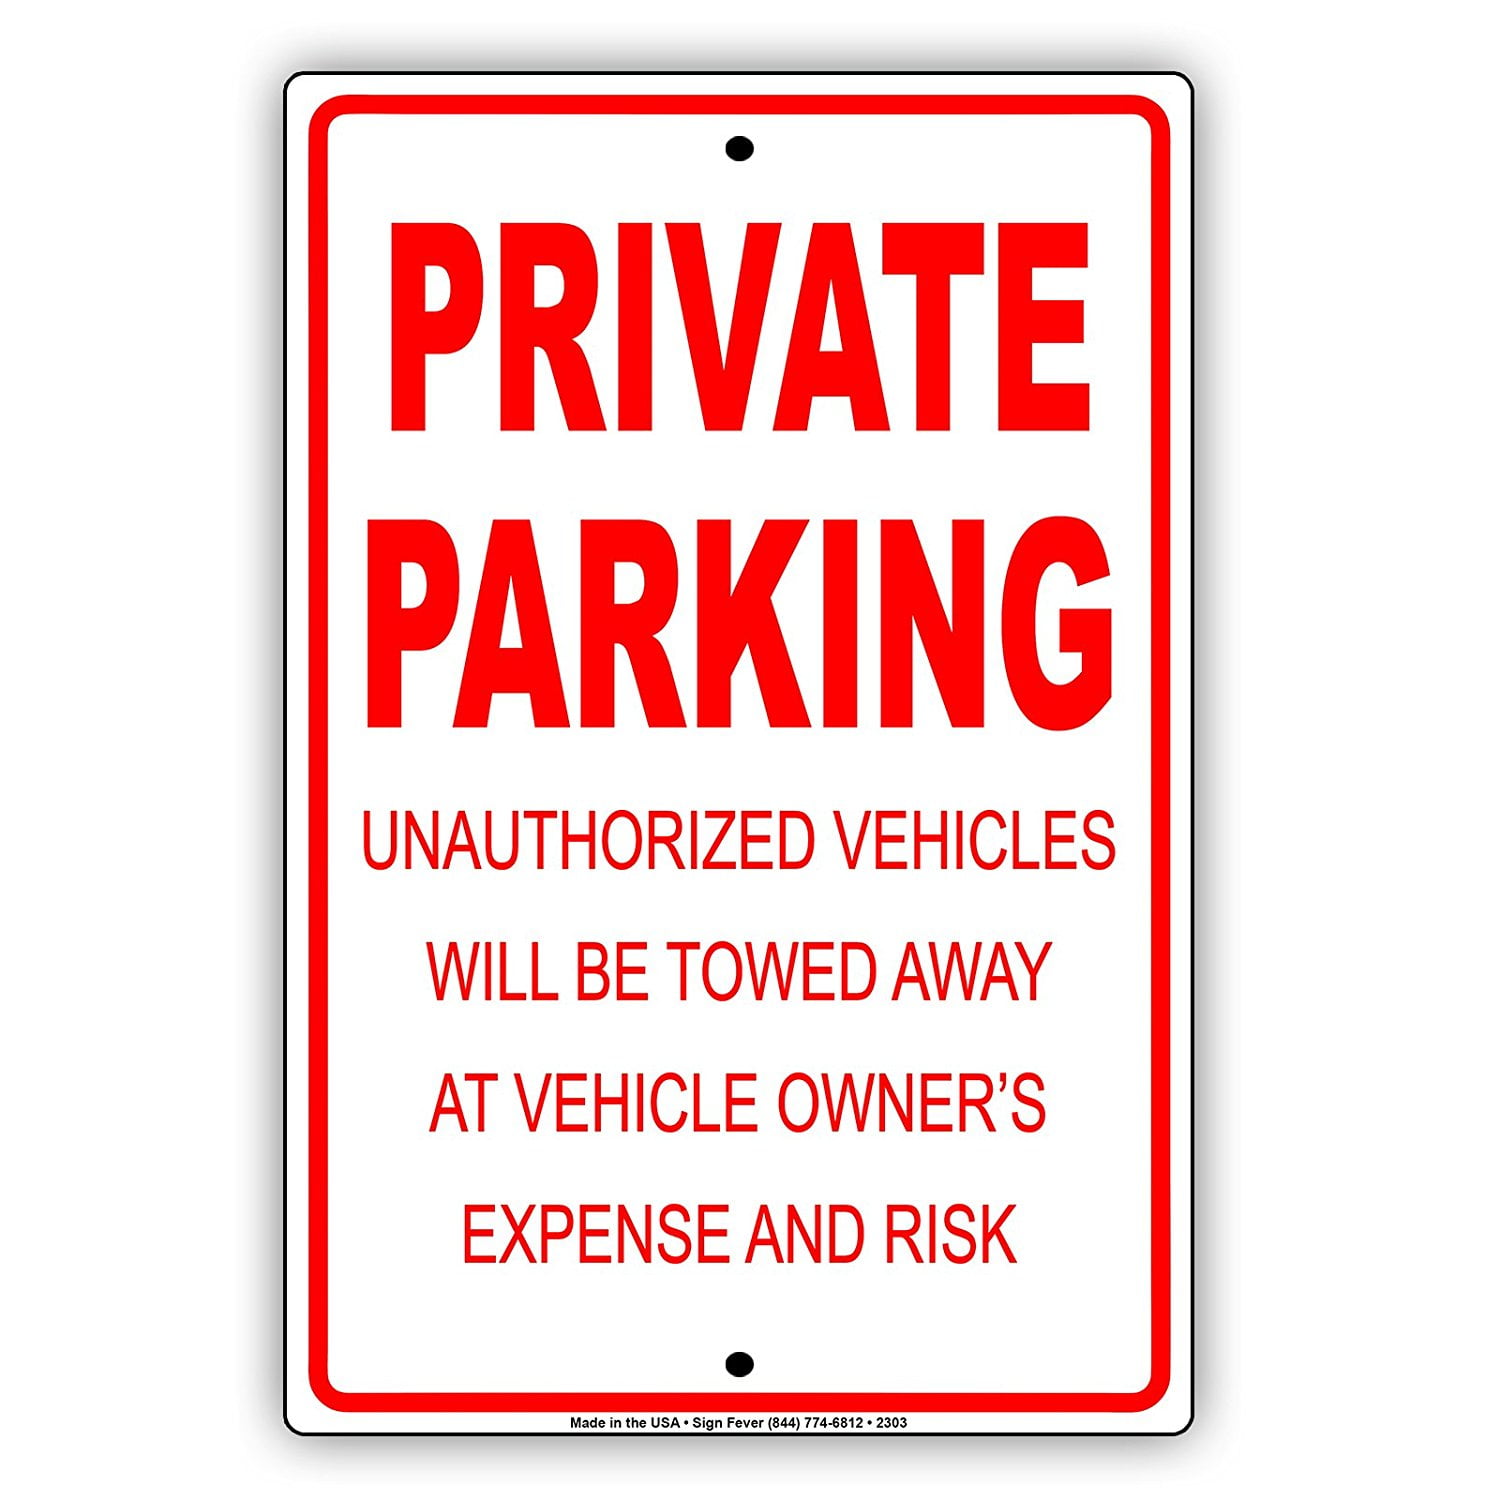 Private Parking Unauthorized Vehicles Will Be Towed Away At Vehicle Owner's  Expense And Risk Alert Attention Caution Warning Notice Aluminum Metal Sign  8